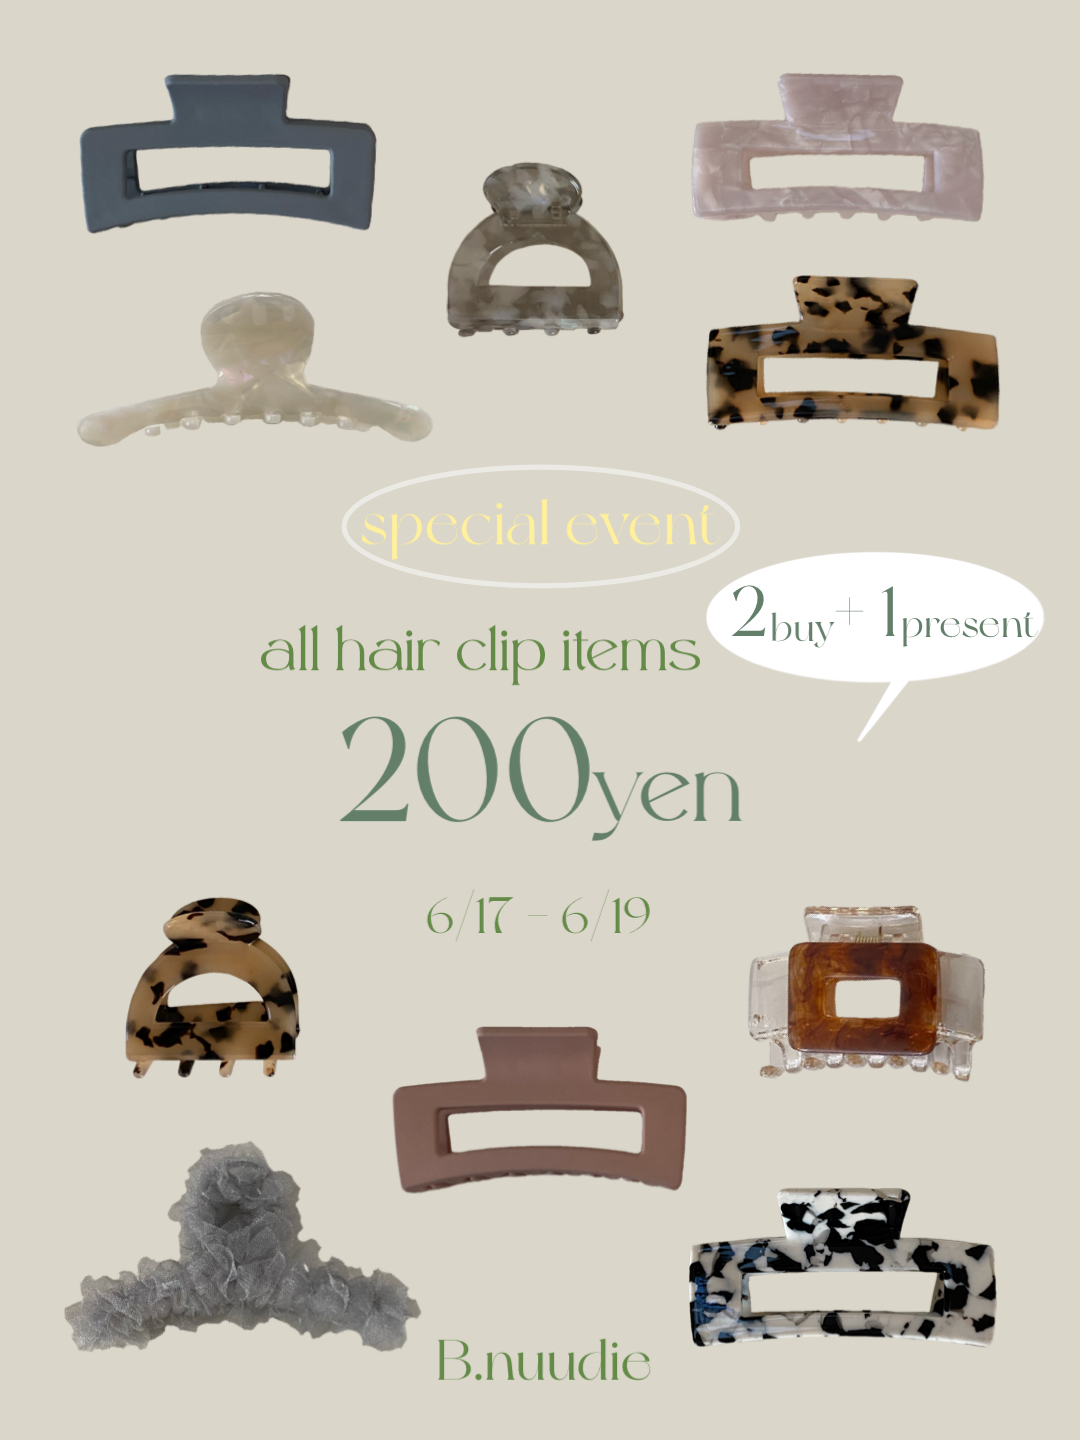 ［Special Event］all hair clip items "200yen"